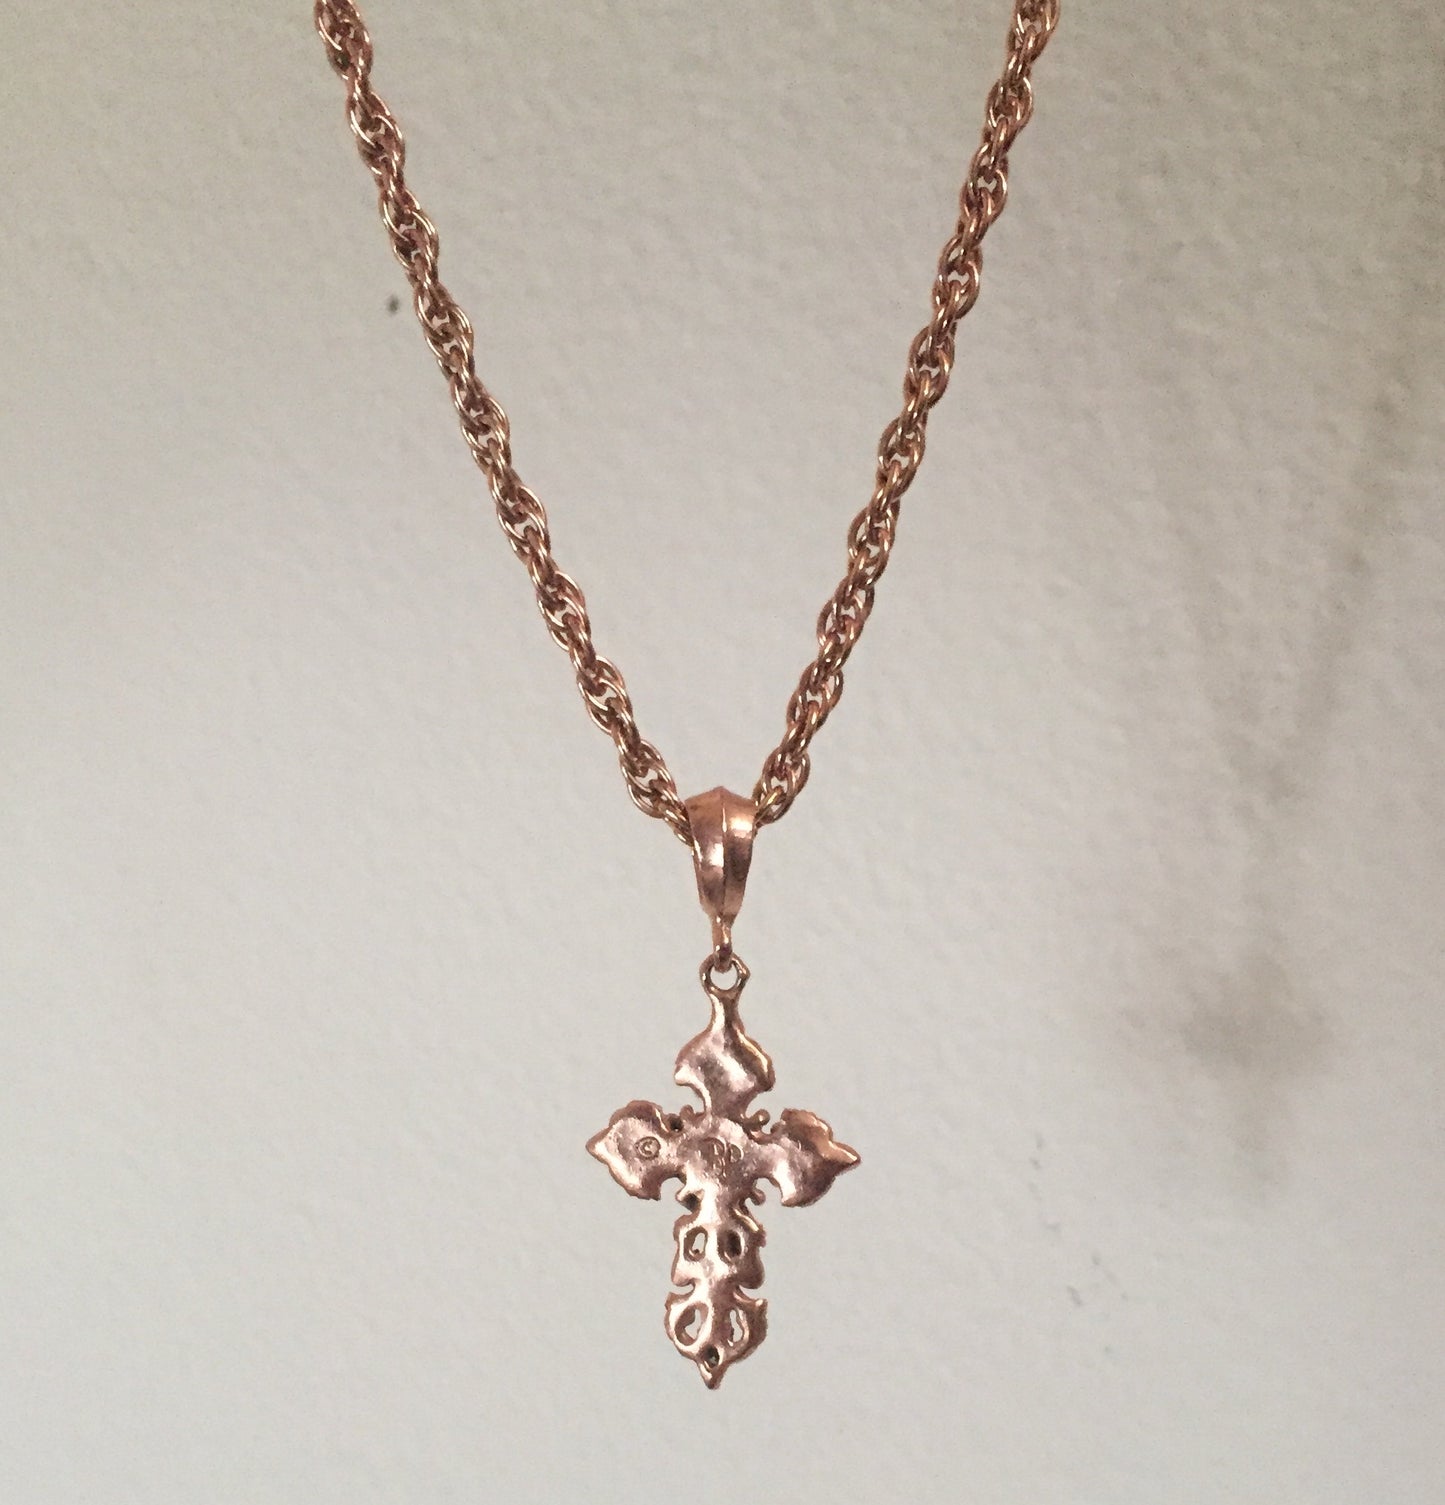 Necklace - Rosegold Silver Ornament Knight Cross by Roman Paul